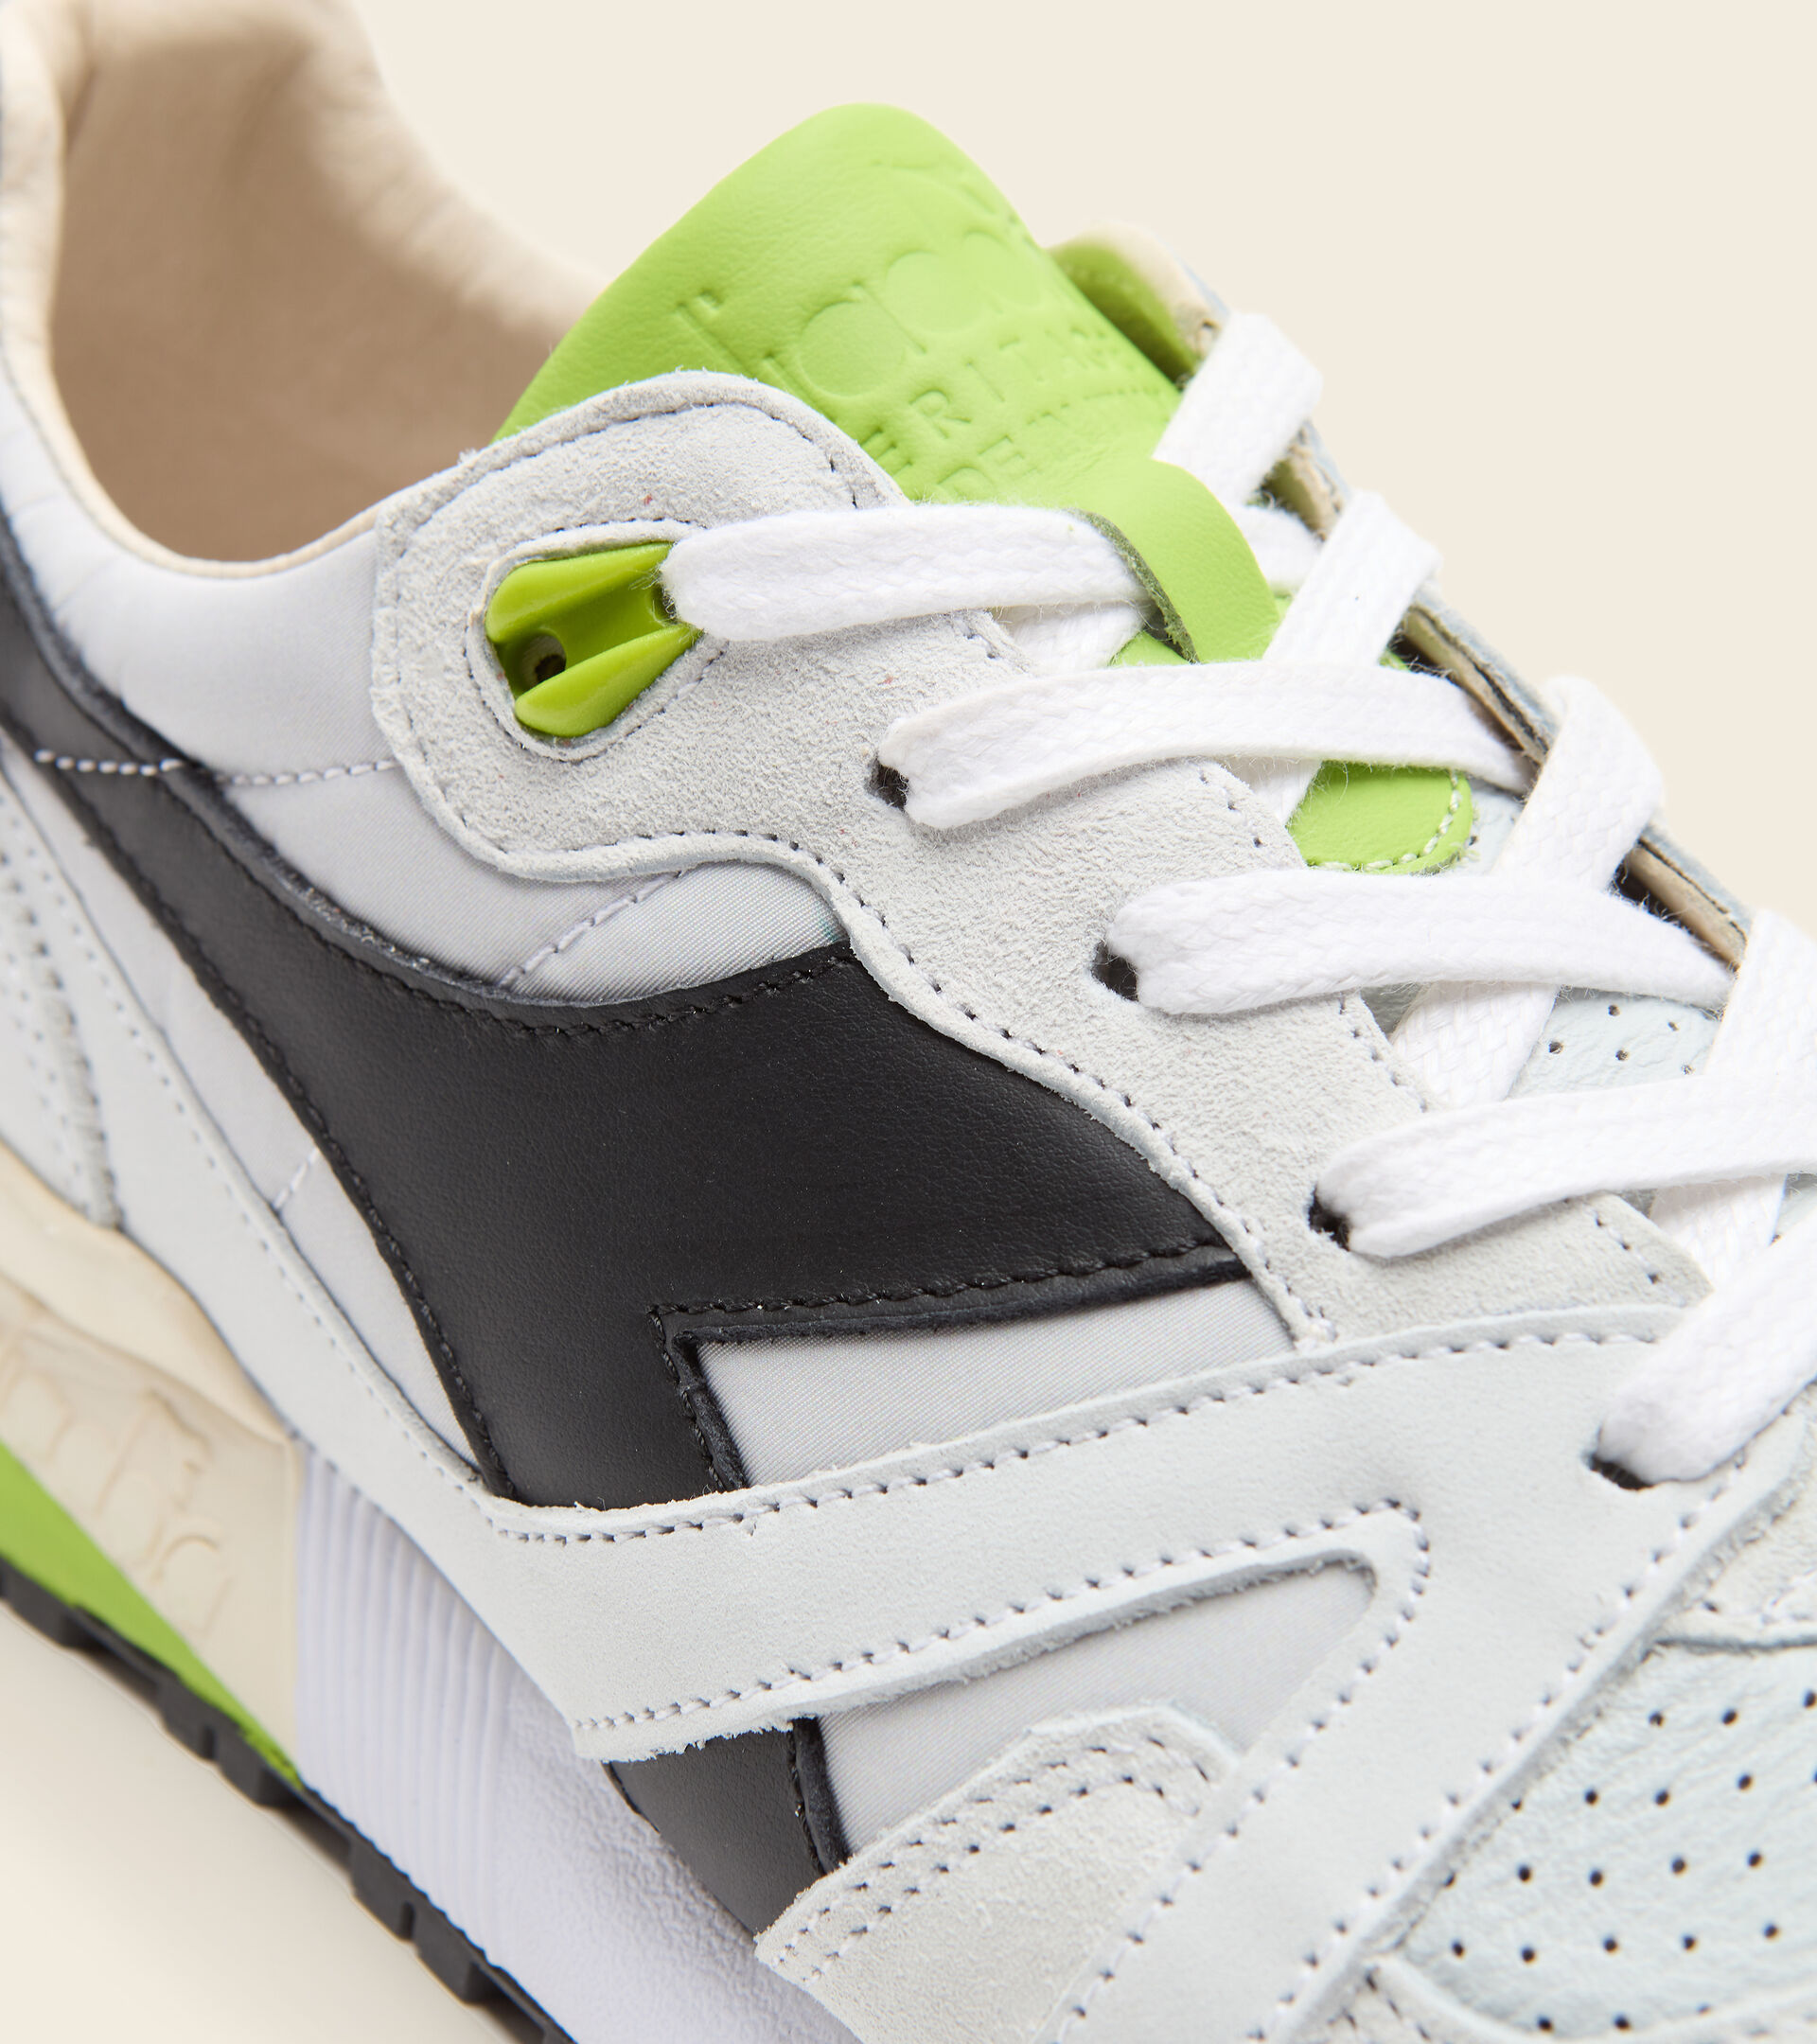 Chaussures Heritage Made in Italy - Homme N9000 ITALIA WEISS/GLETSCHER GRAU - Diadora